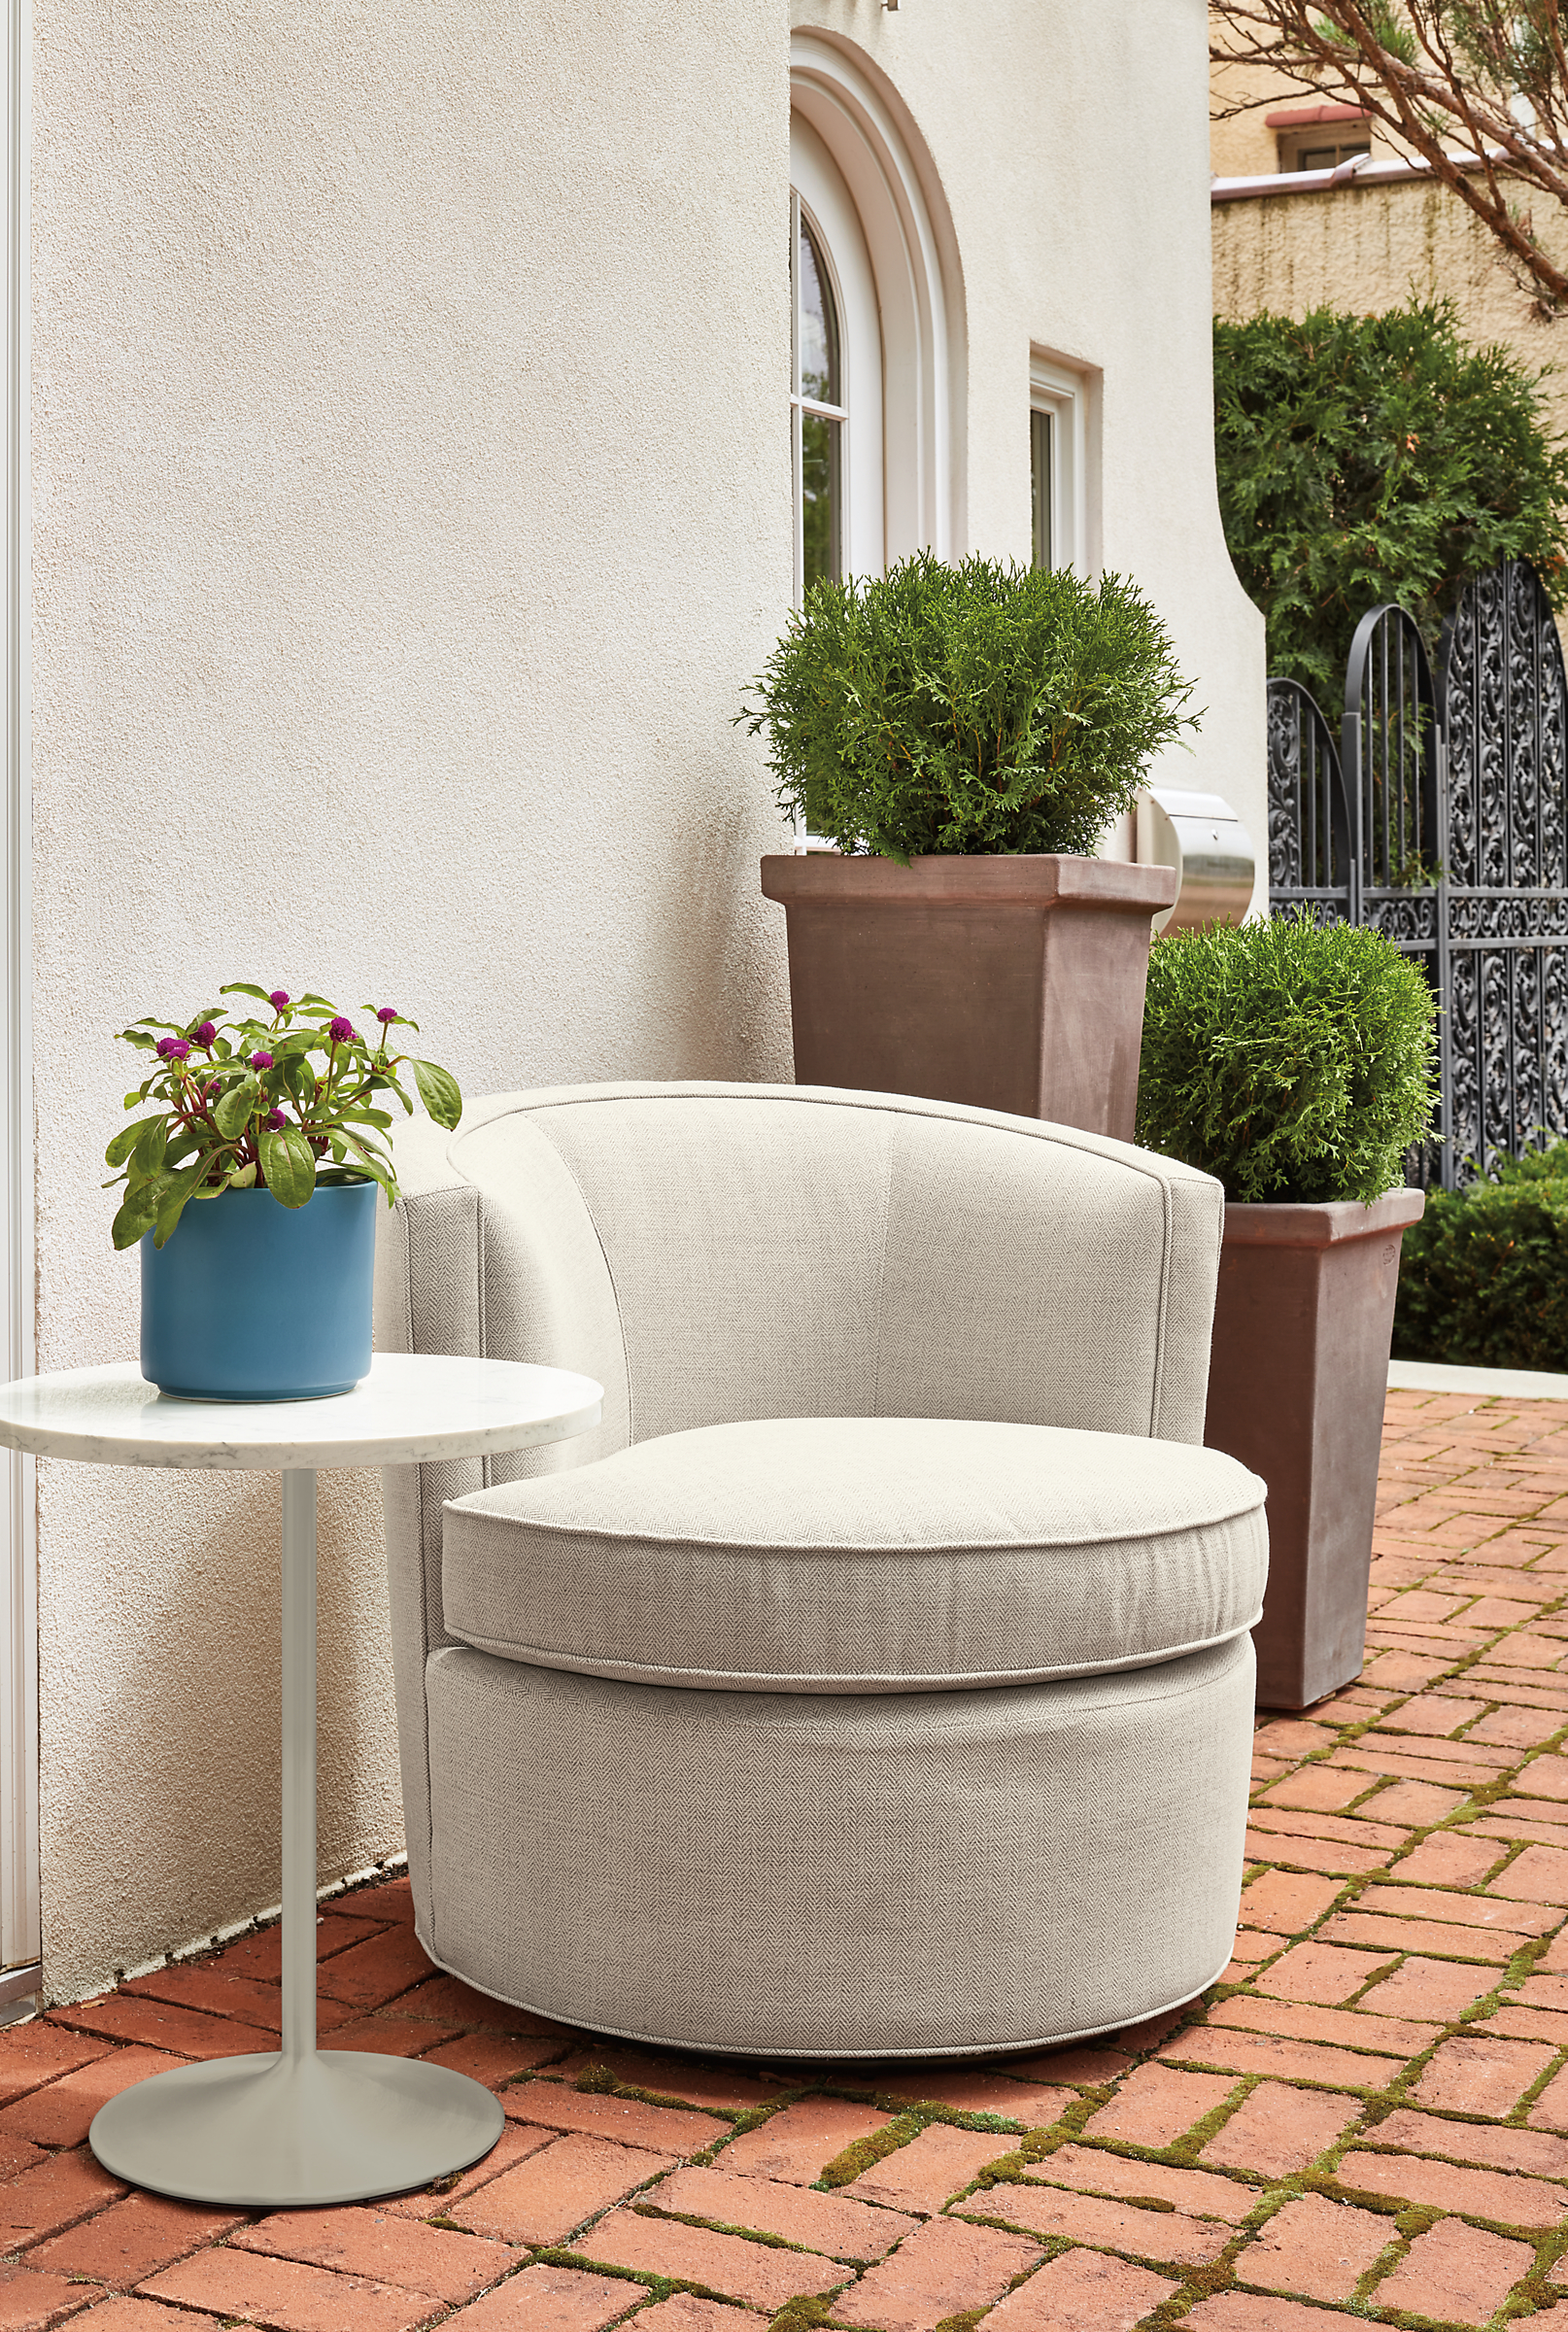 Ambrose Swivel Chair in Corso Grey with Aria 18-Round Side Table in taupe with Marble white quartz top.